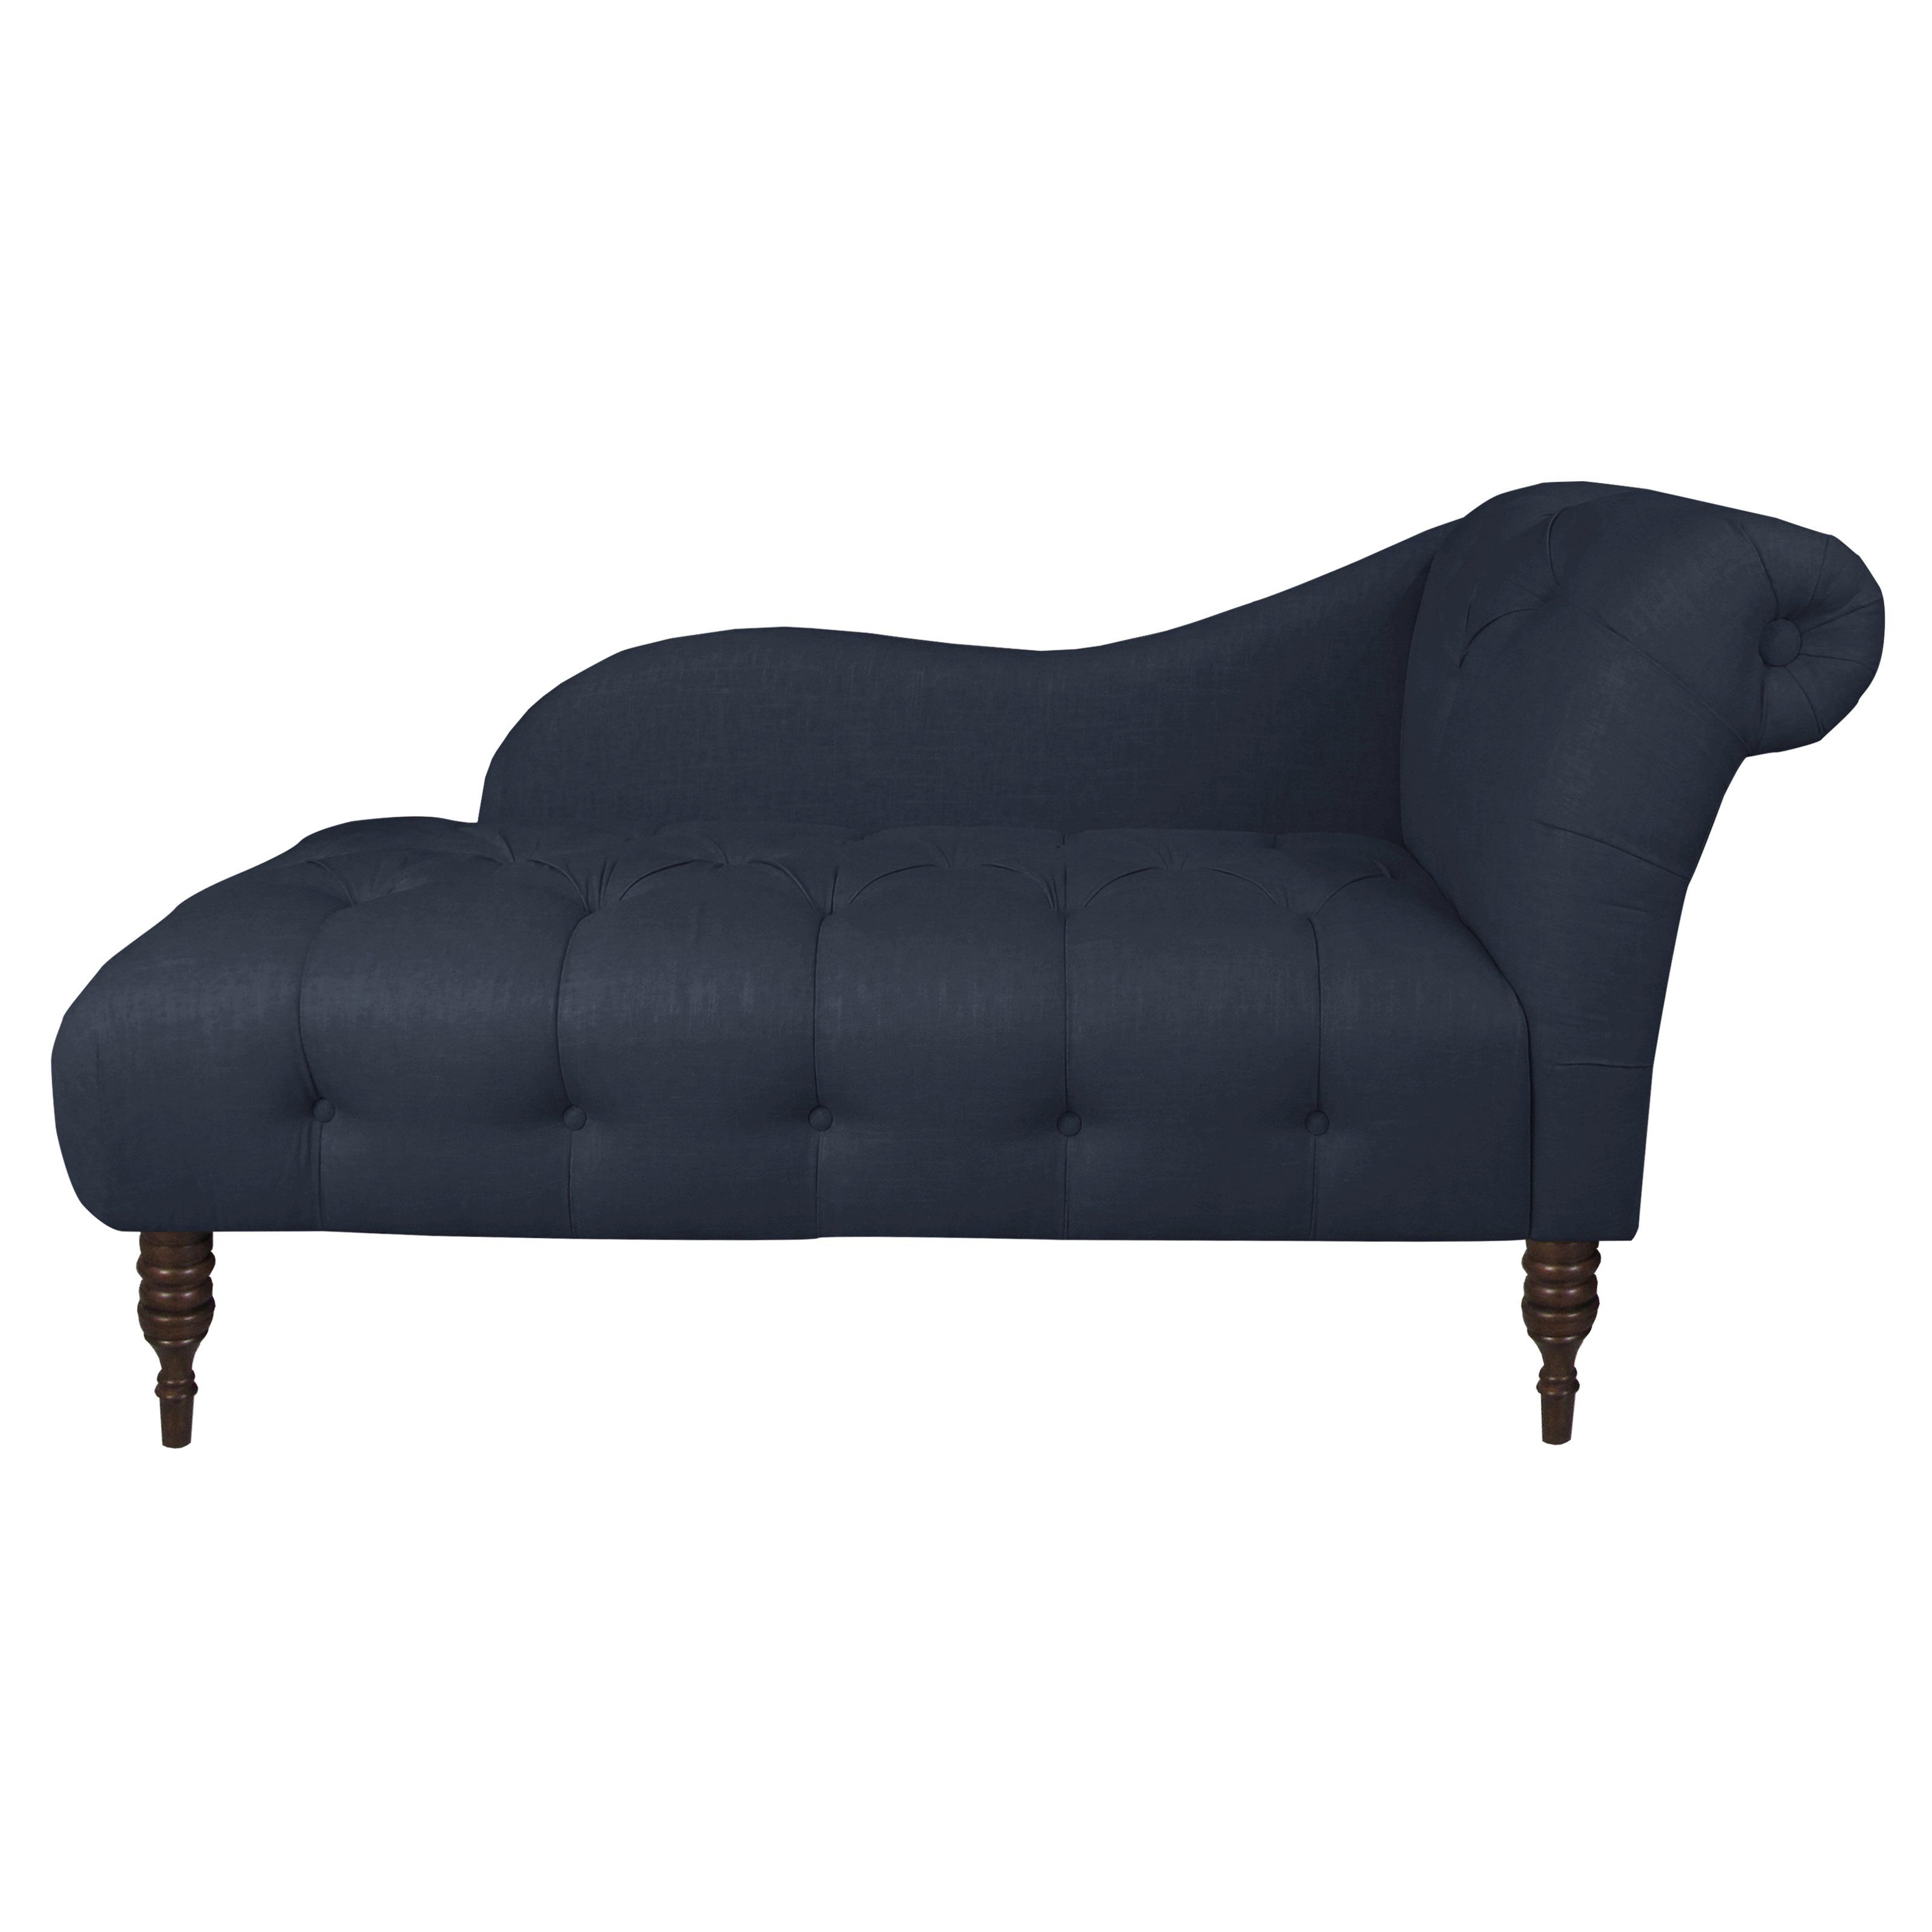 Widely Used Madison Tufted Chaise Lounge (View 6 of 15)